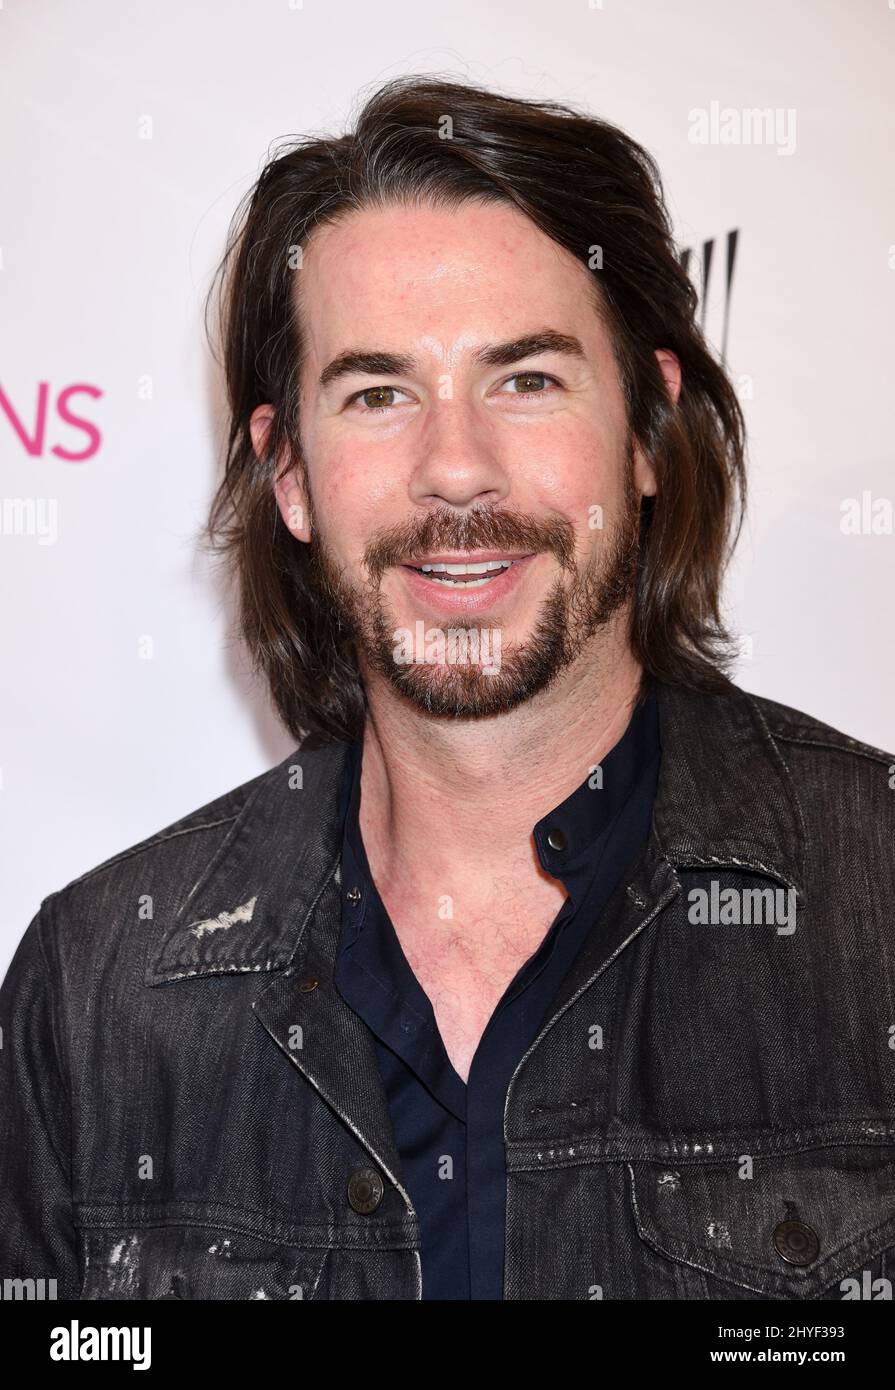 Jerry Trainor at the 'Cover Versions' Los Angeles Premiere held at the Landmark Regent Theatre on April 9, 2018 in Westwood, USA Stock Photo